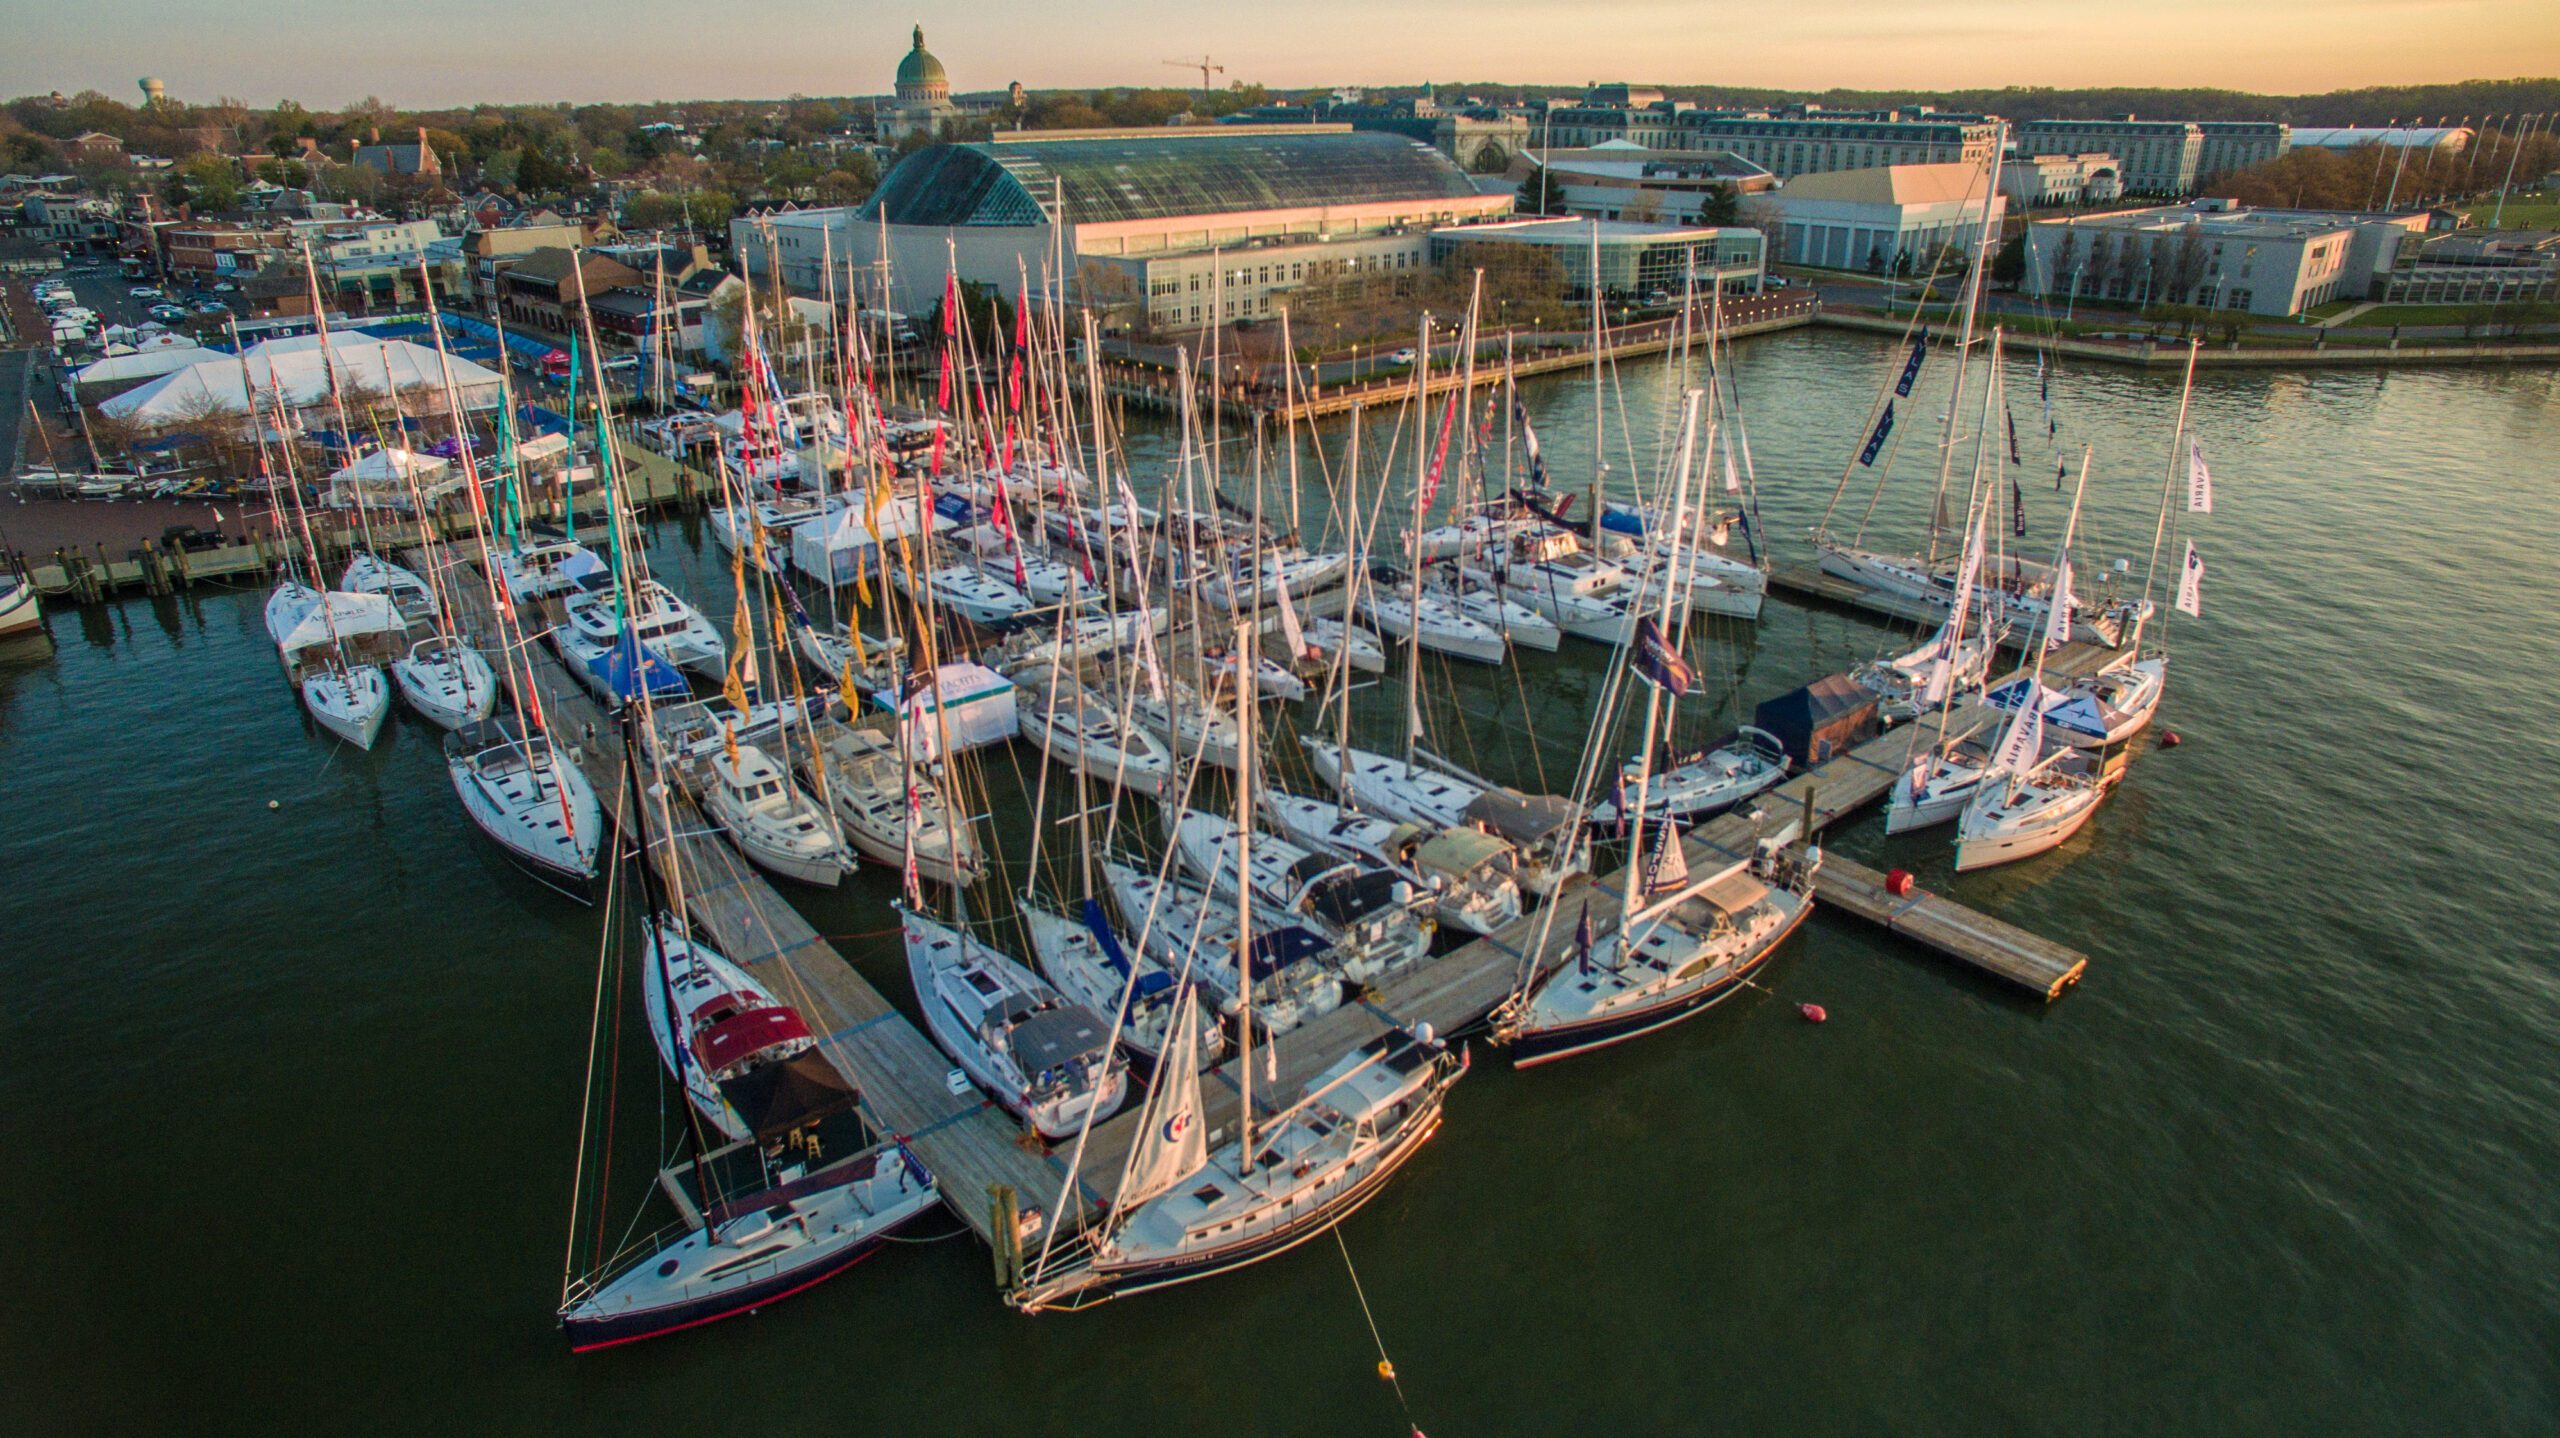 A Celebration of Sailing at the Annapolis Spring Sailboat Show